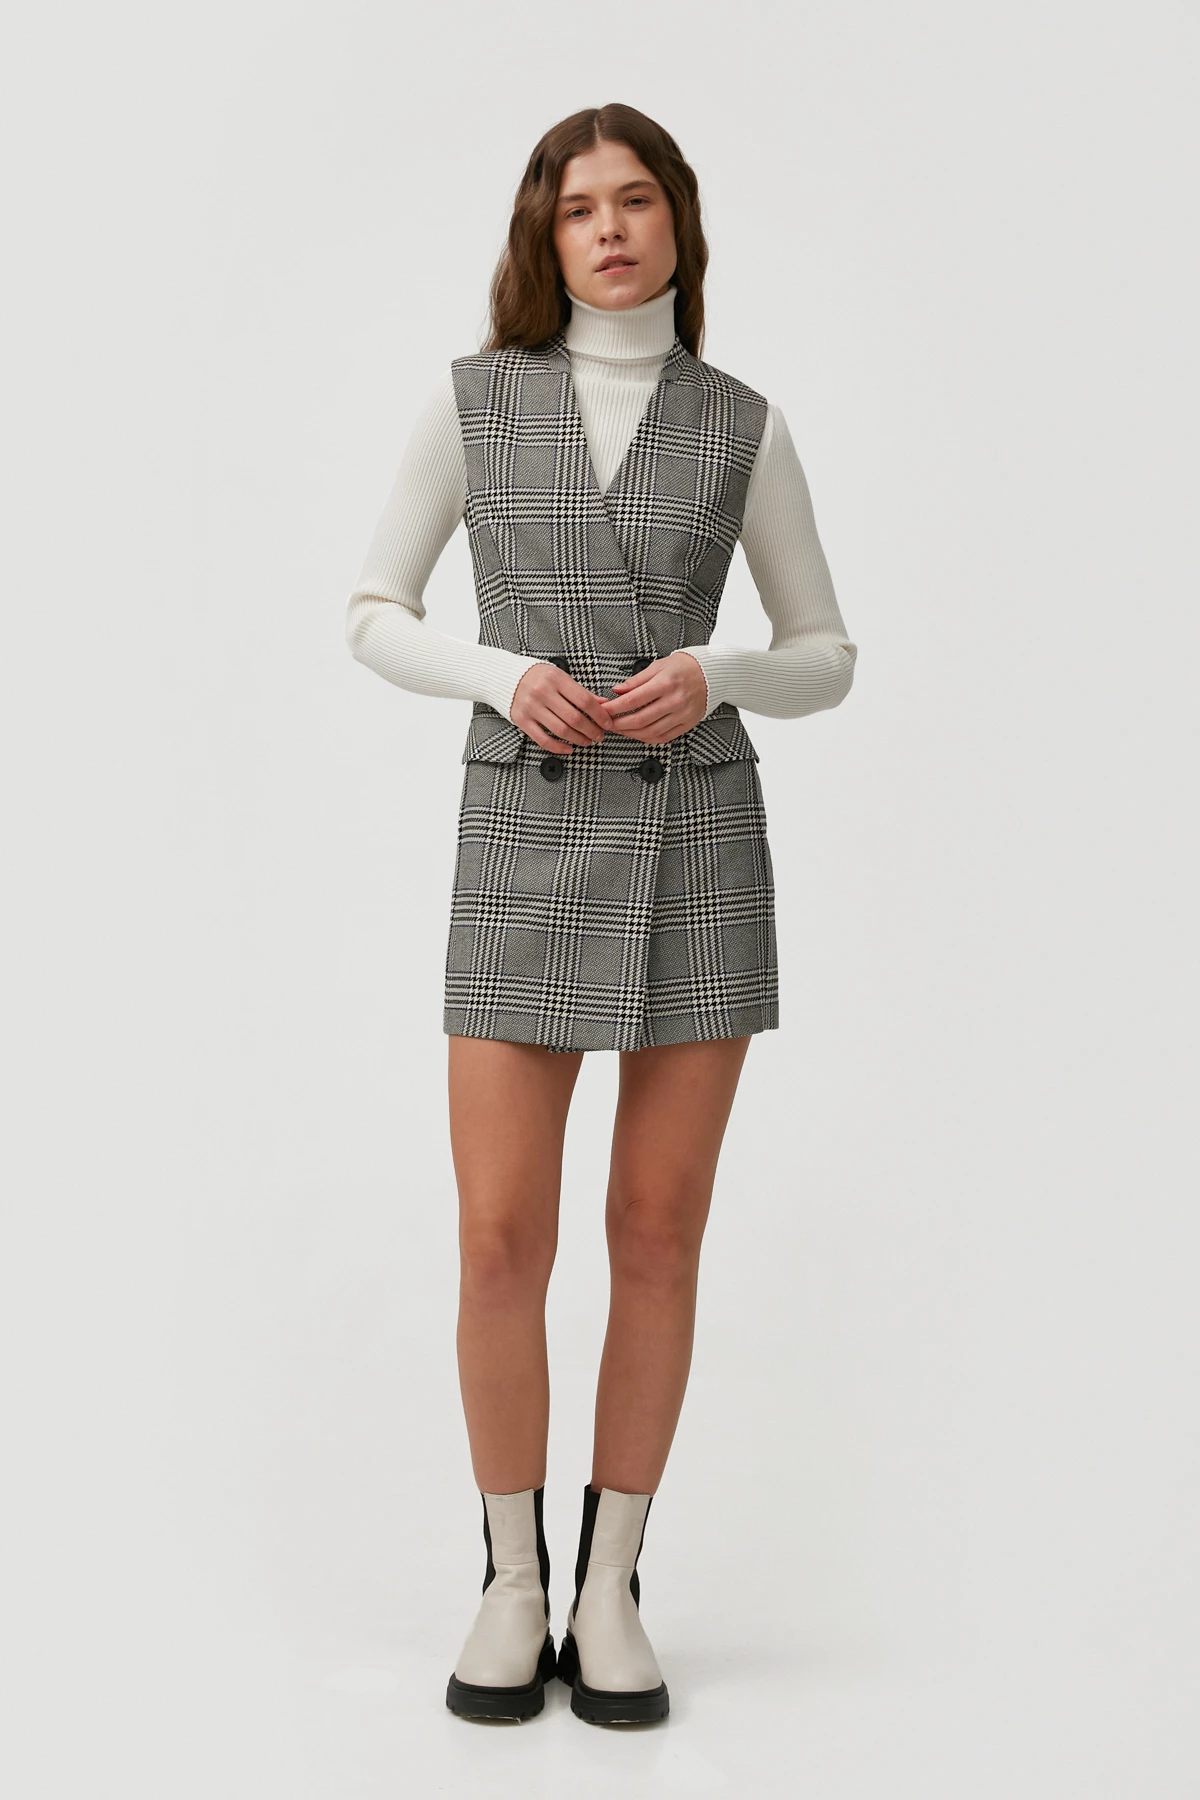 Double-breasted vest-dress made of plaid suiting fabric, photo 1